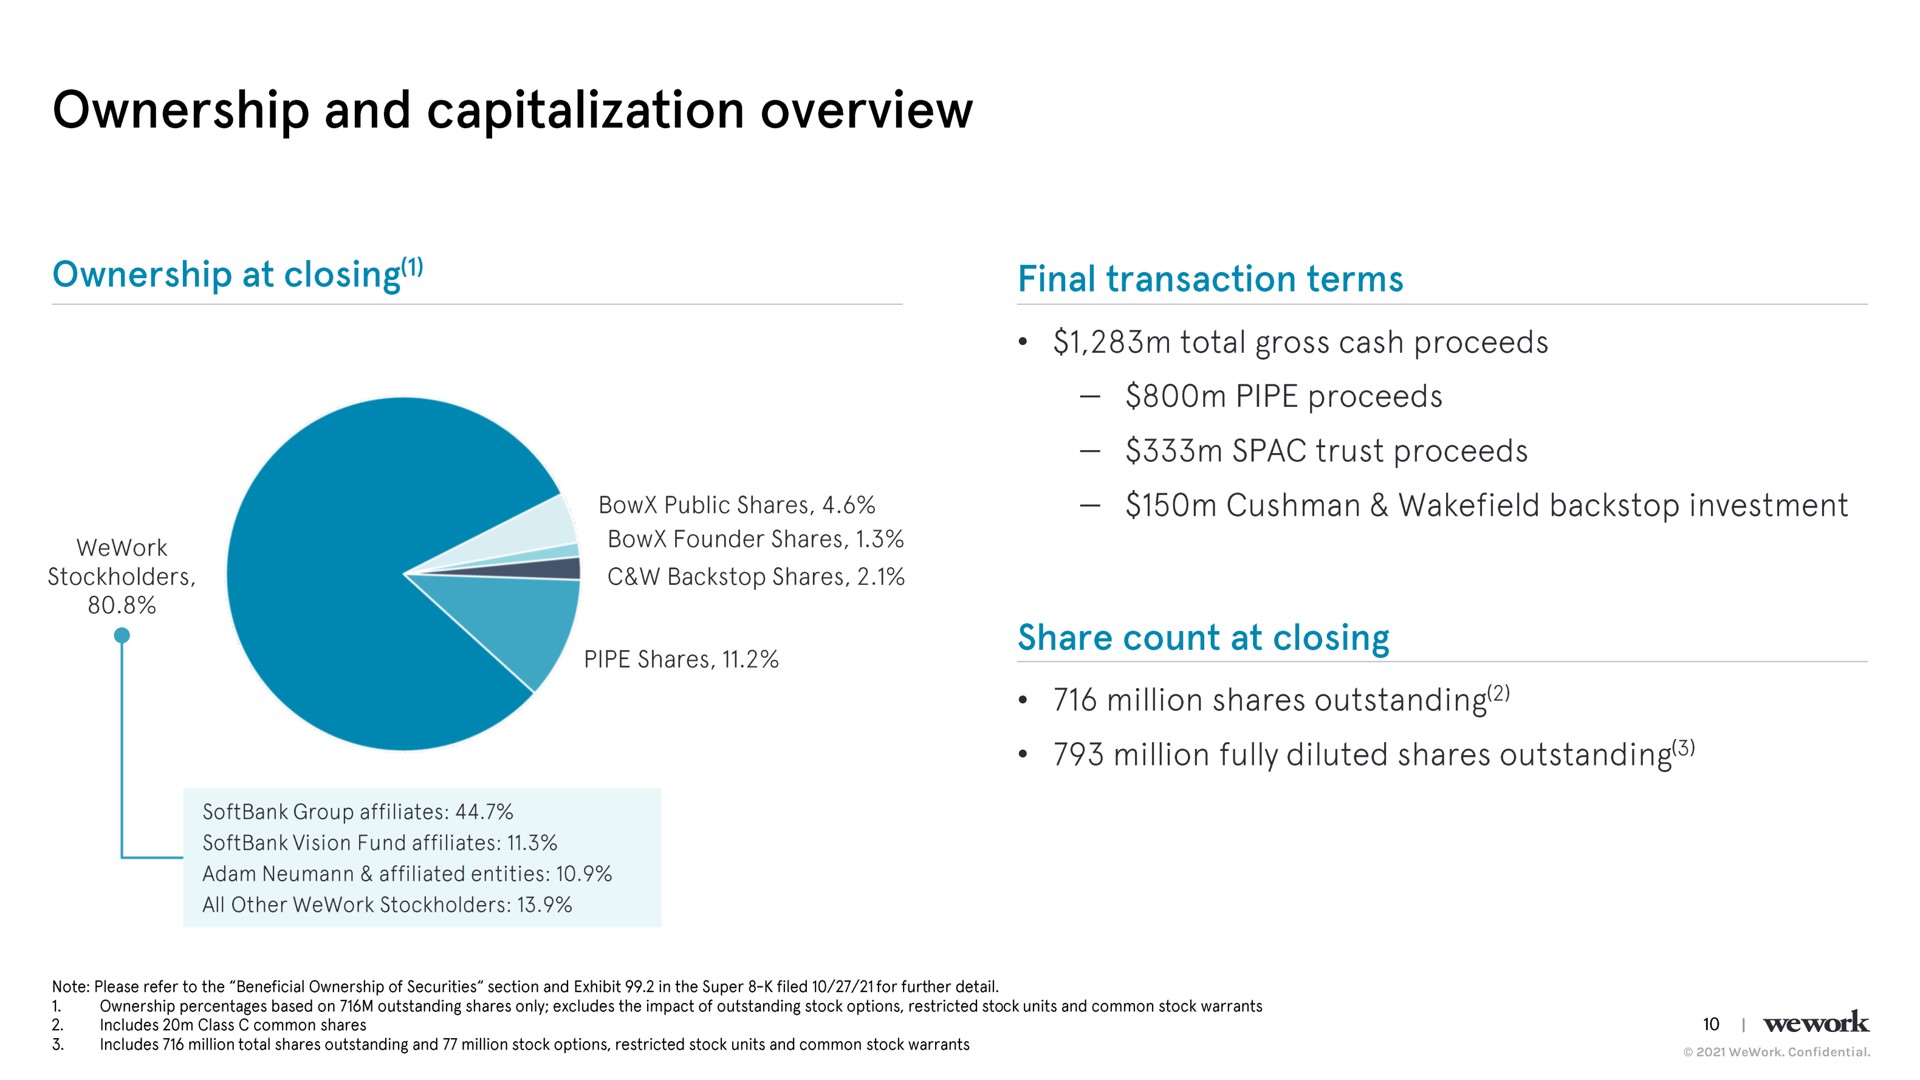 confidential ownership and capitalization overview ownership at closing final transaction terms pipe proceeds trust proceeds pipe shares i share count at closing million shares outstanding million fully diluted shares outstanding | WeWork